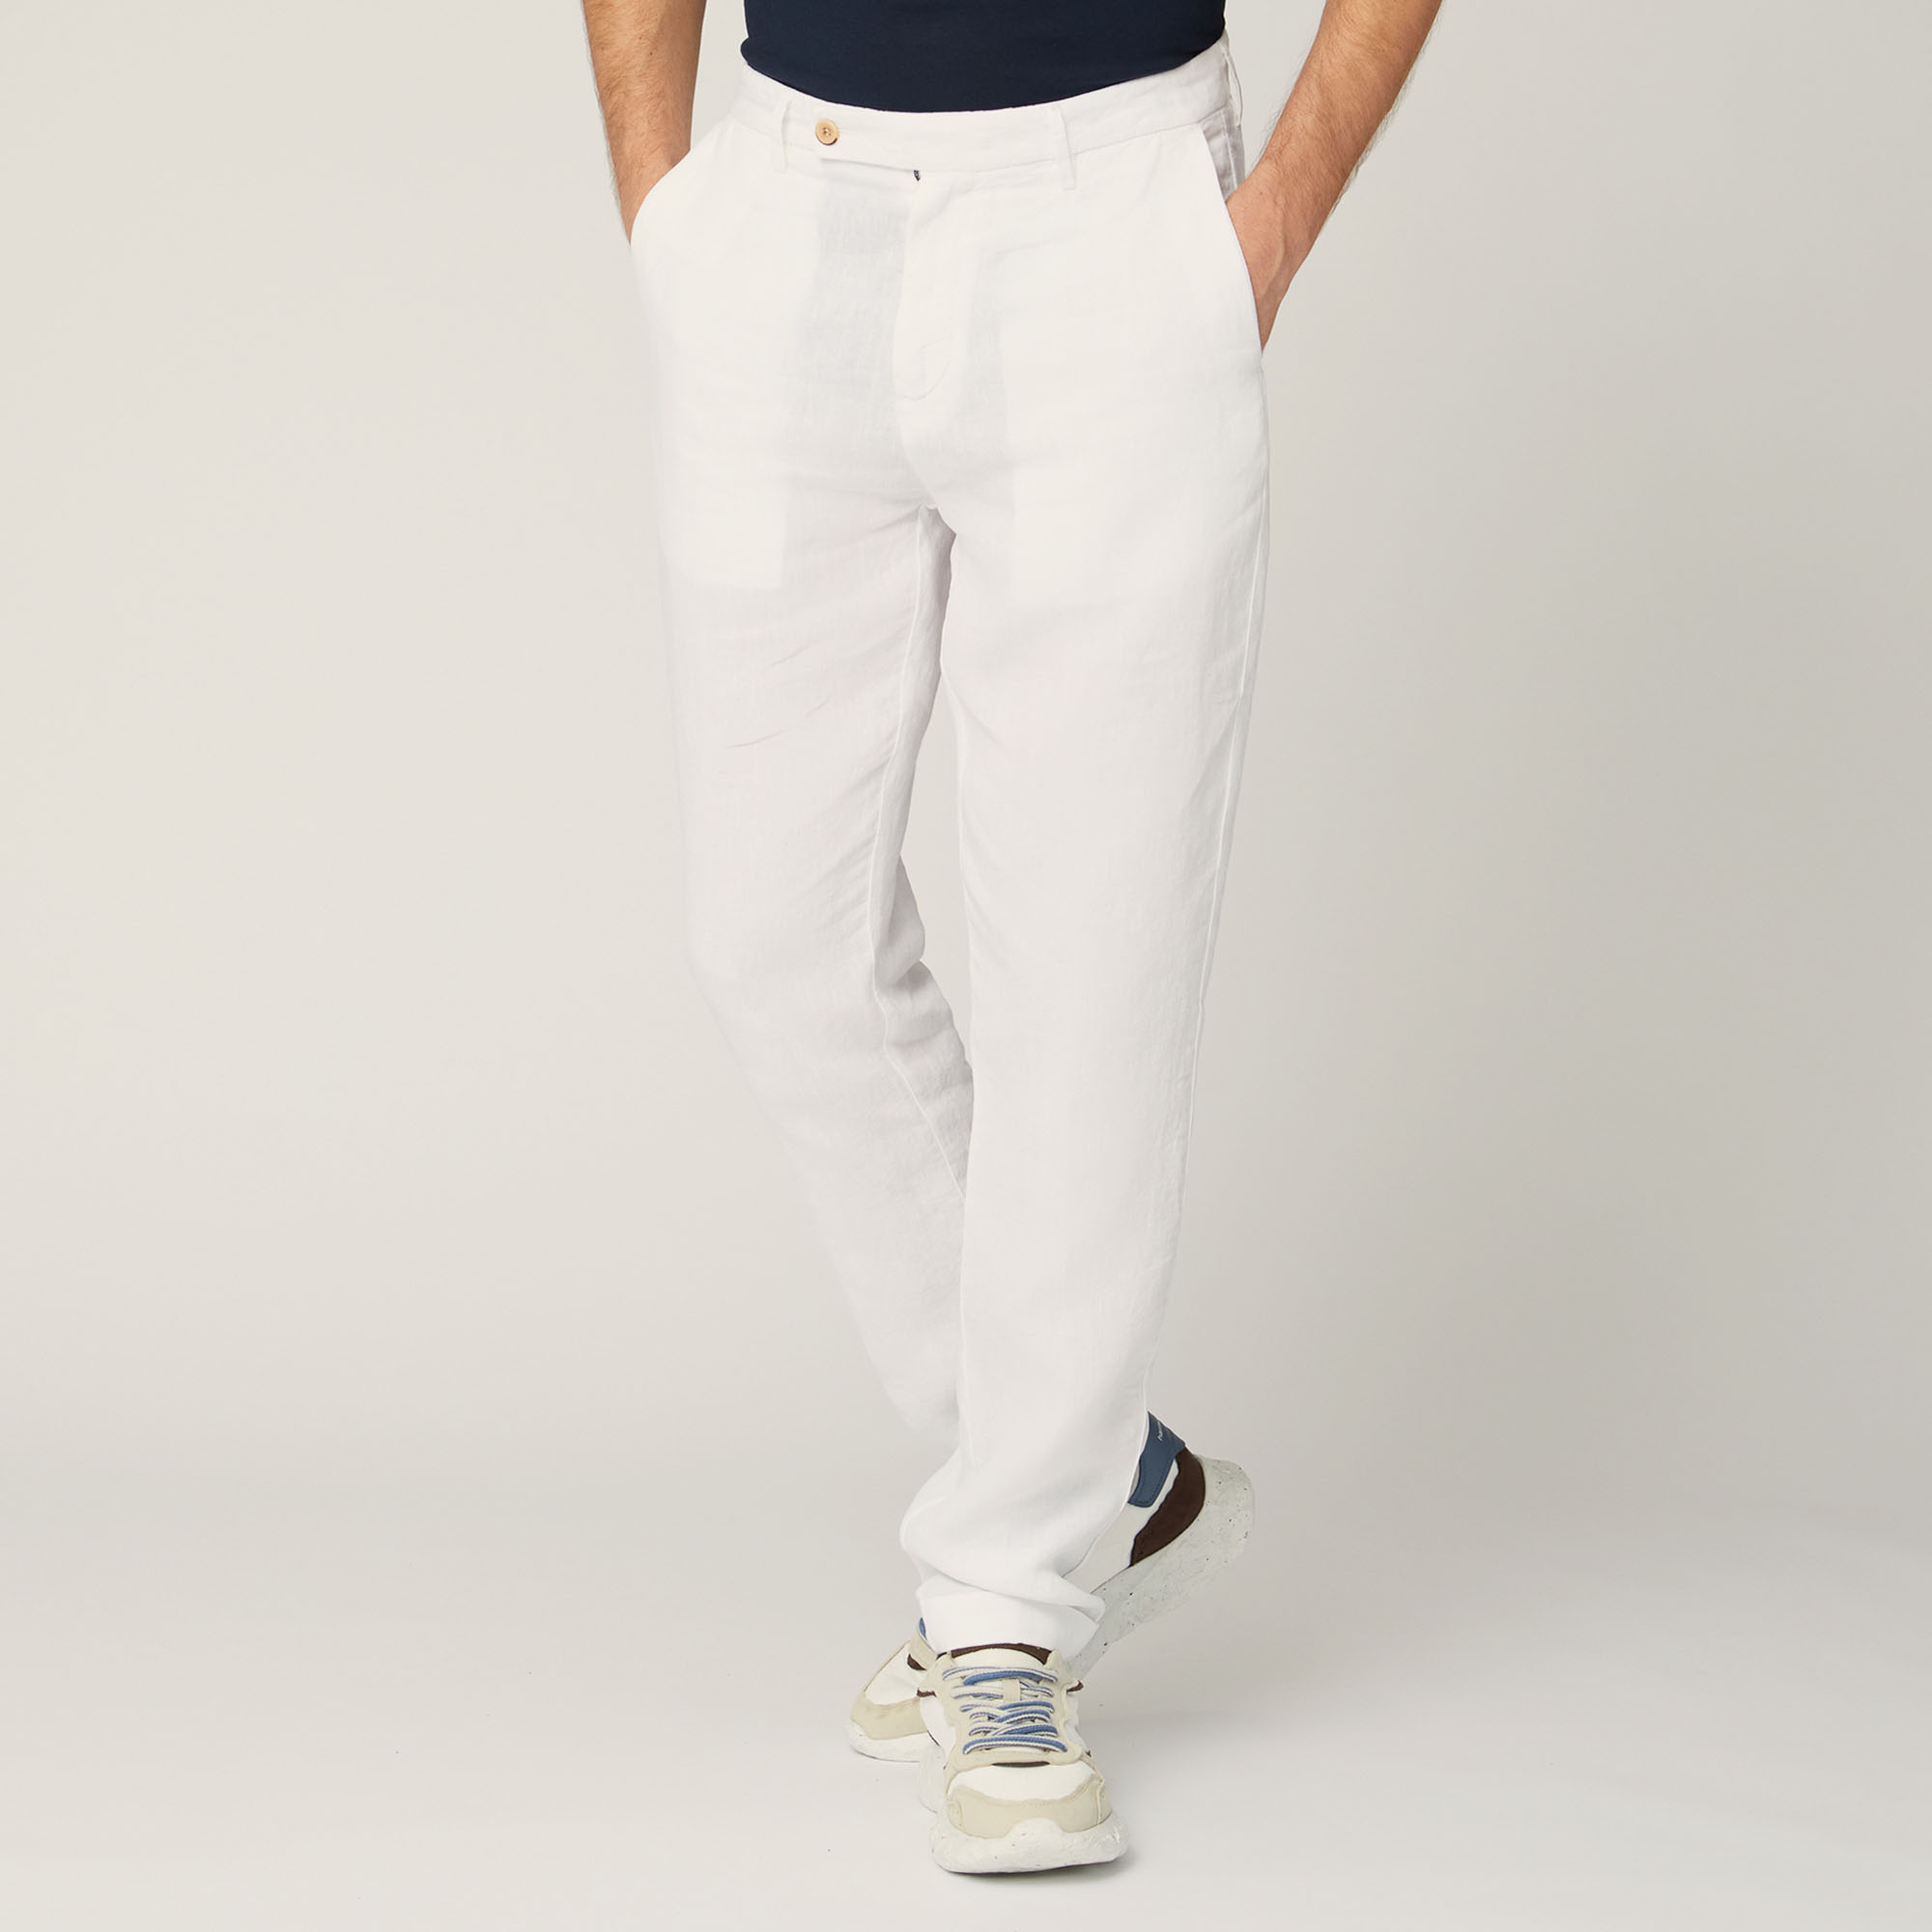 Linen Pants, White, large image number 0